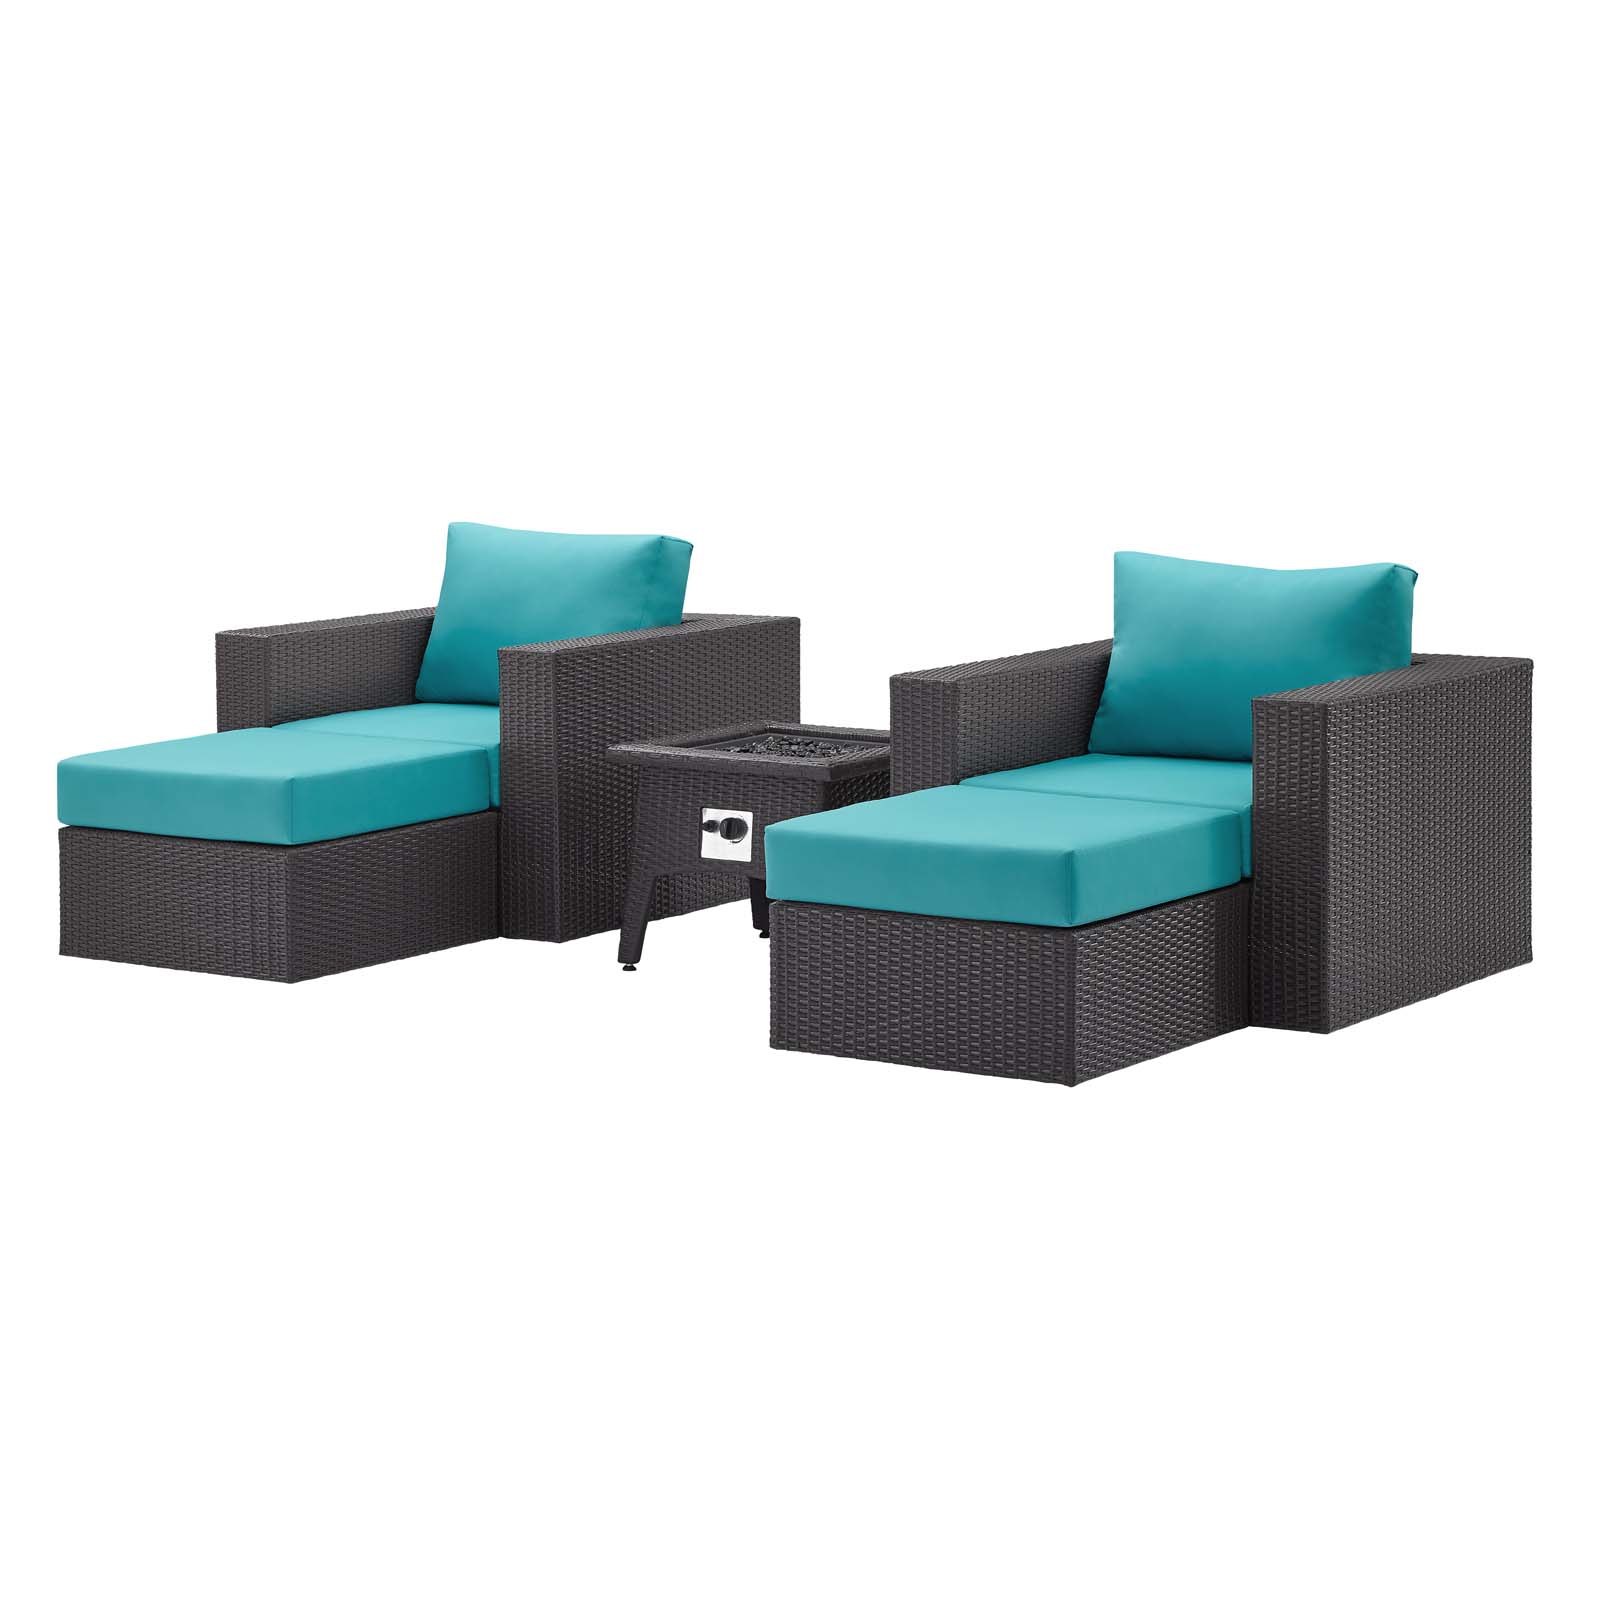 Contemporary Modern Urban Designer Outdoor Patio Balcony Garden Furniture Lounge Sofa, Chair and Coffee Table Fire Pit Set, Fabric Rattan Wicker, Blue - image 1 of 9